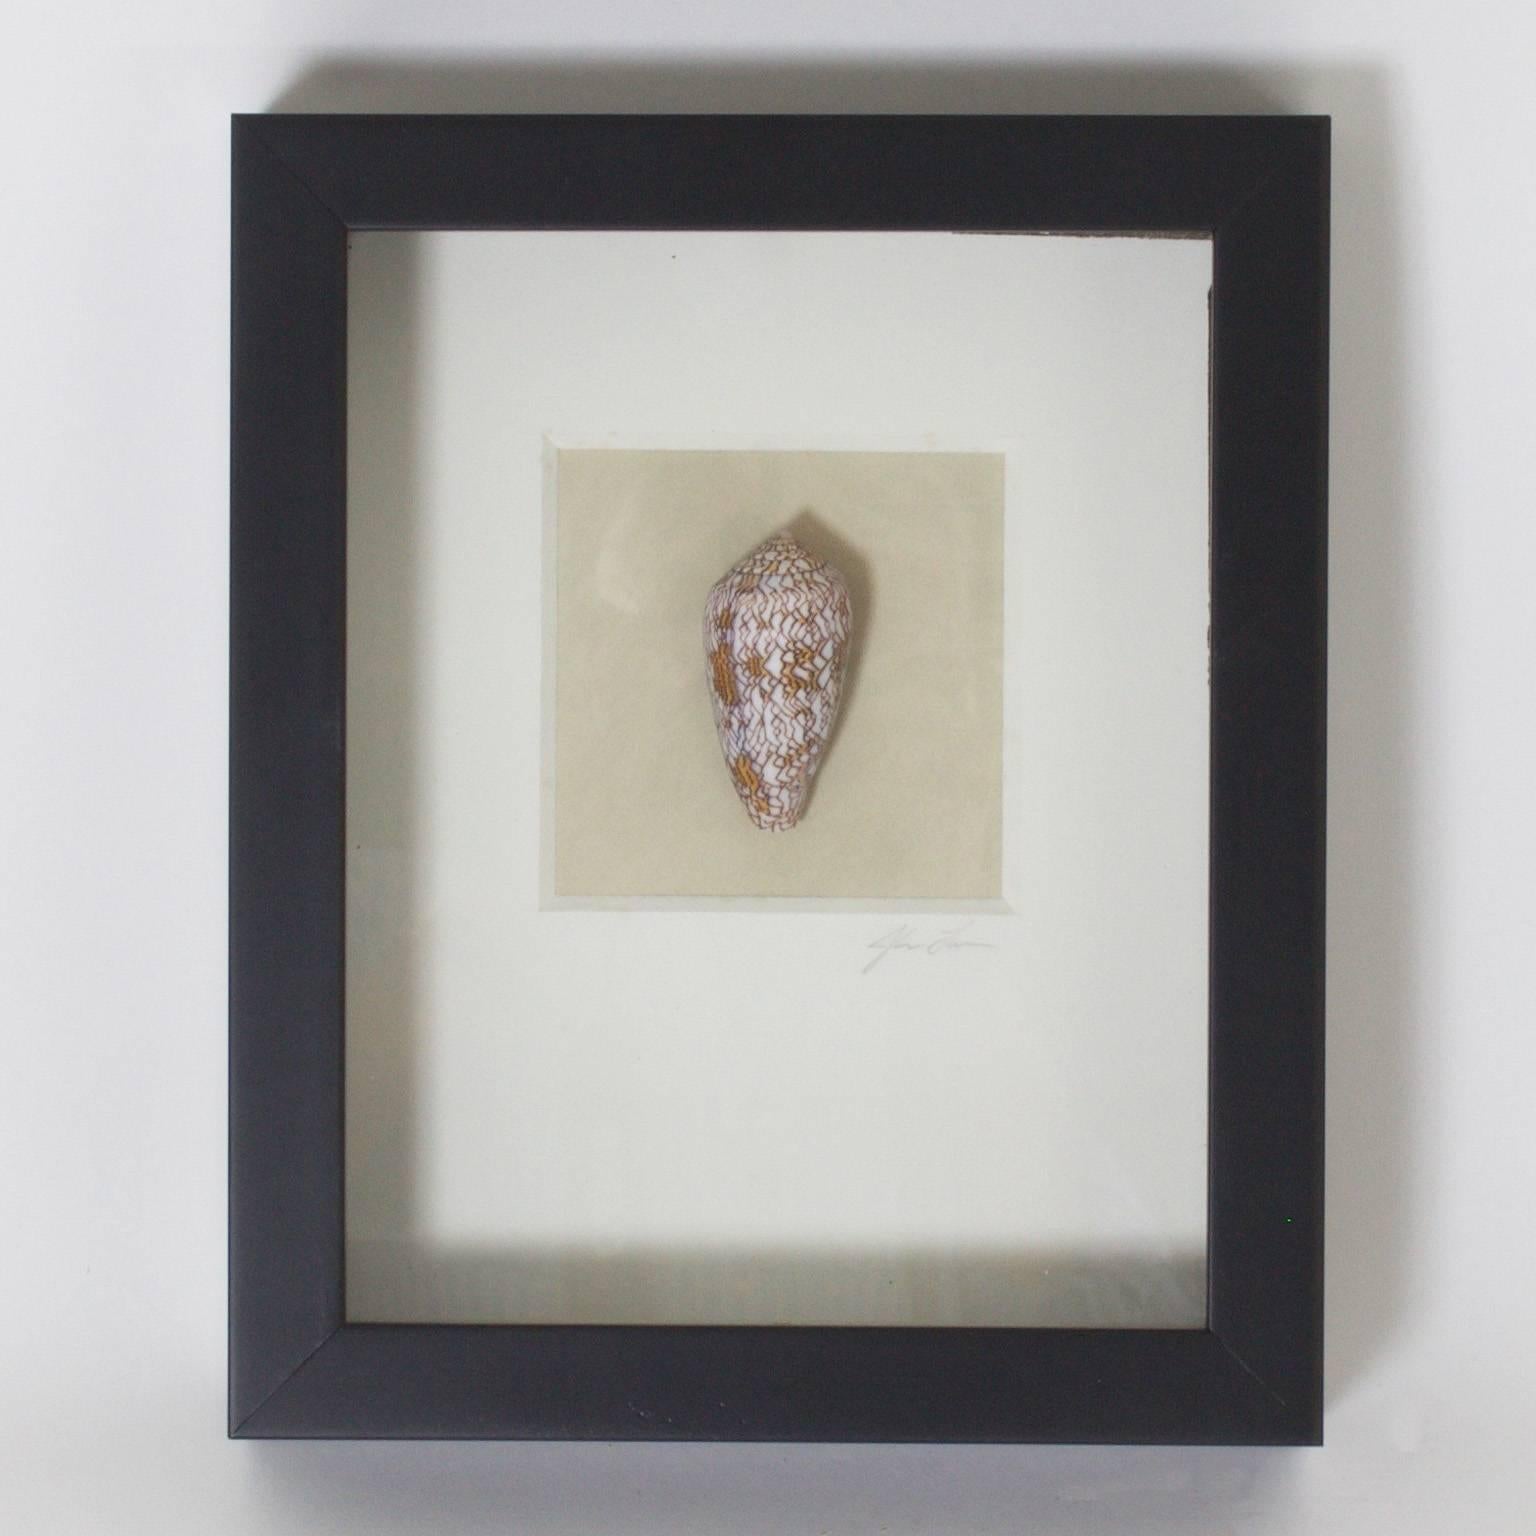 Inspired set of three decorative groups of seashell specimens, carefully curated and presented in a shadow box format. One of three sets offered.

 